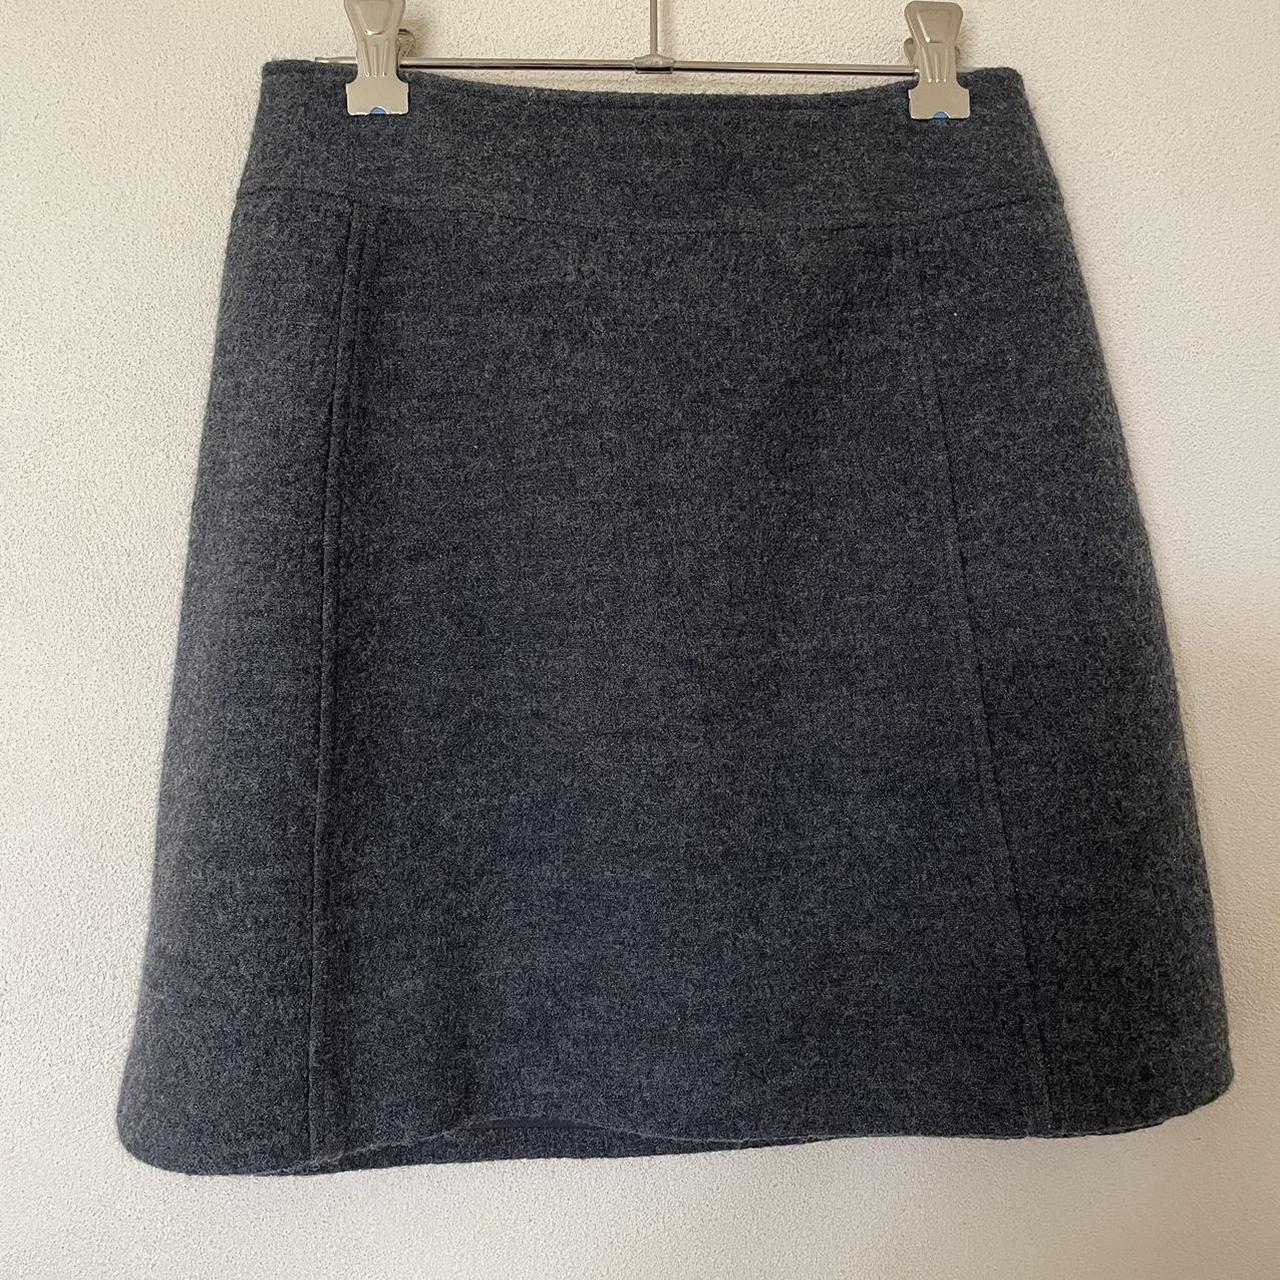 MARCS winter woollen skirt. Great with stockings and... - Depop